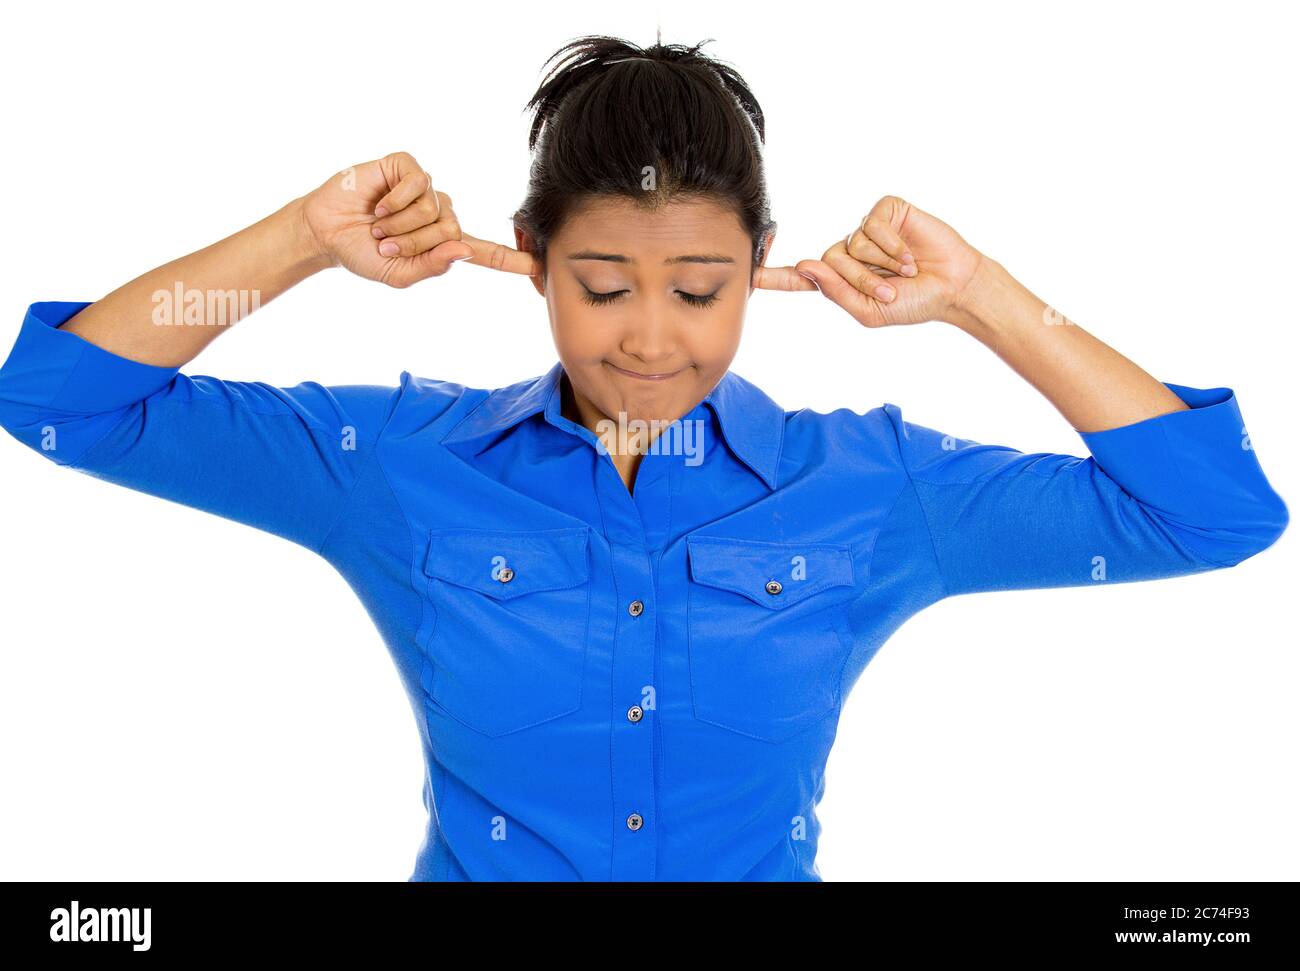 Portrait of a young unhappy stressed woman covering closed ears looking down annoyed by loud noise Stock Photo